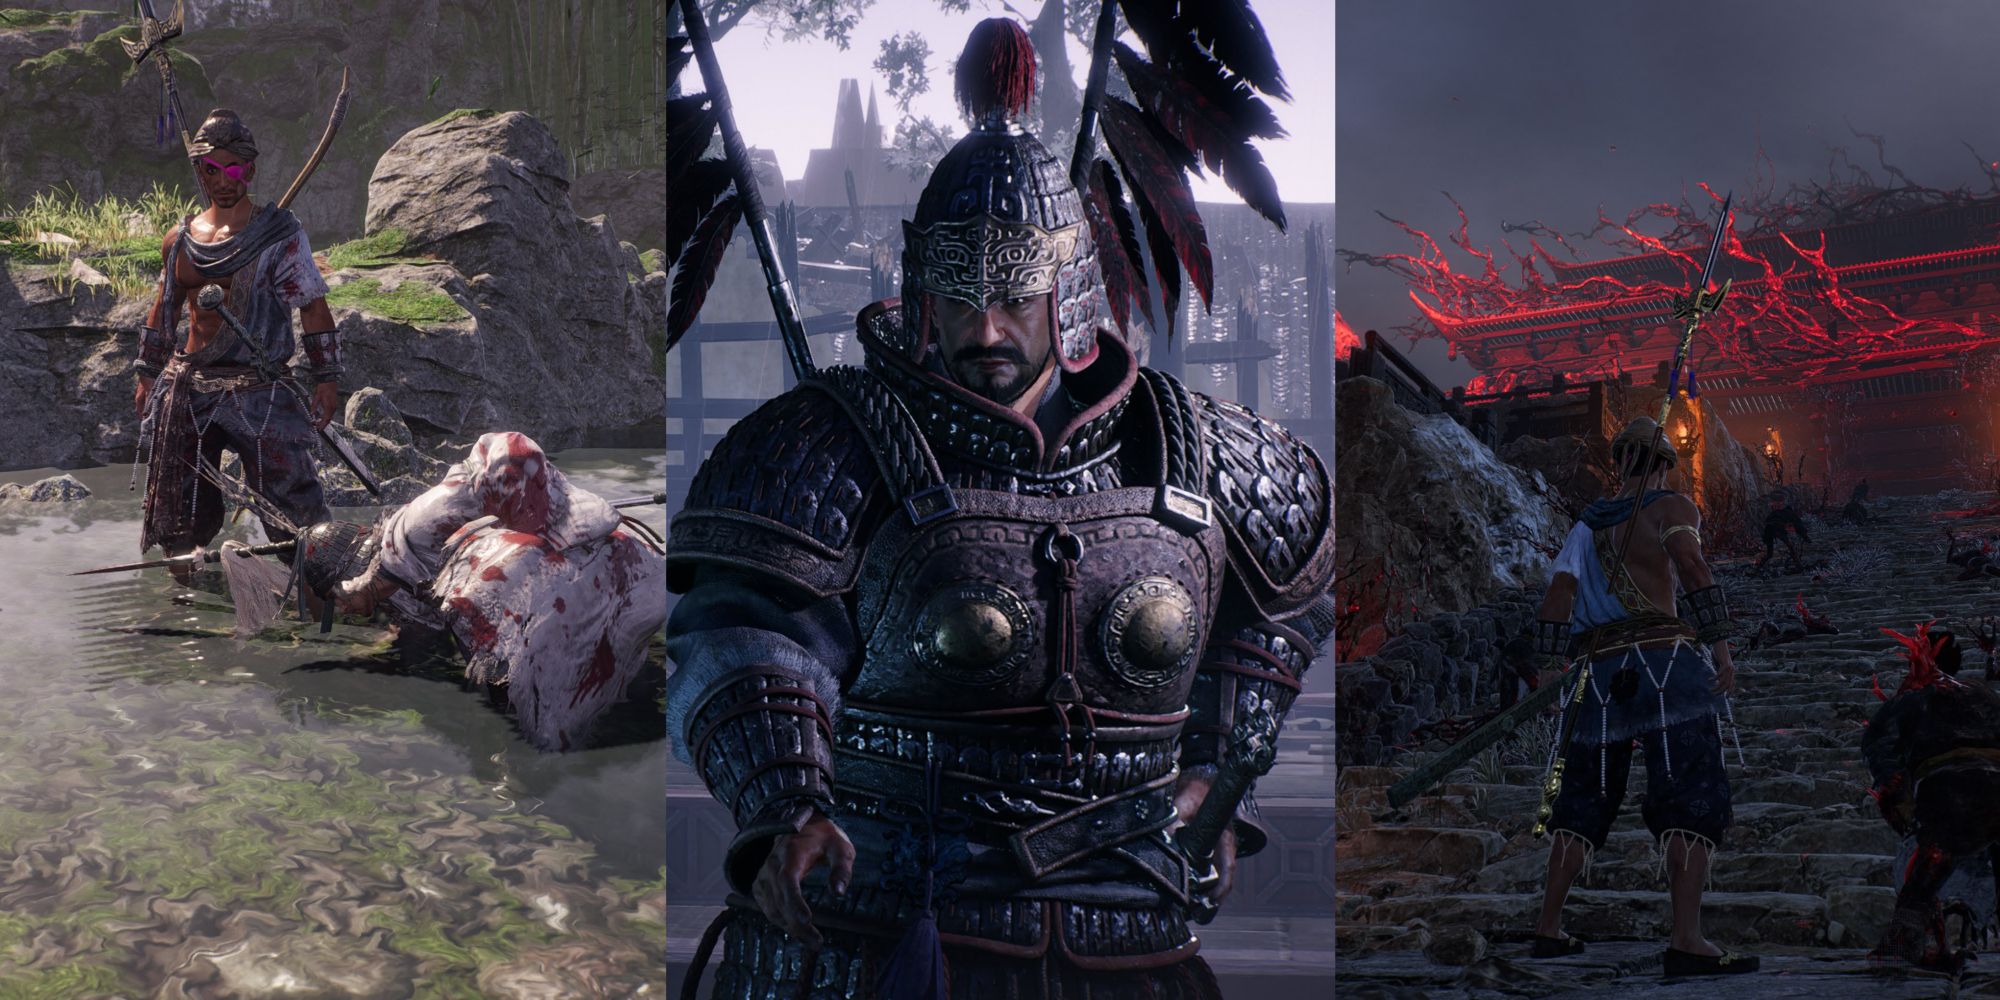 Features three images. From left to right: Protagonist stood over a defeated Zhao Yun, Zhang Liao prepares to fight you, protagonist at the foot of some stairs looking at demon encrusted architecture